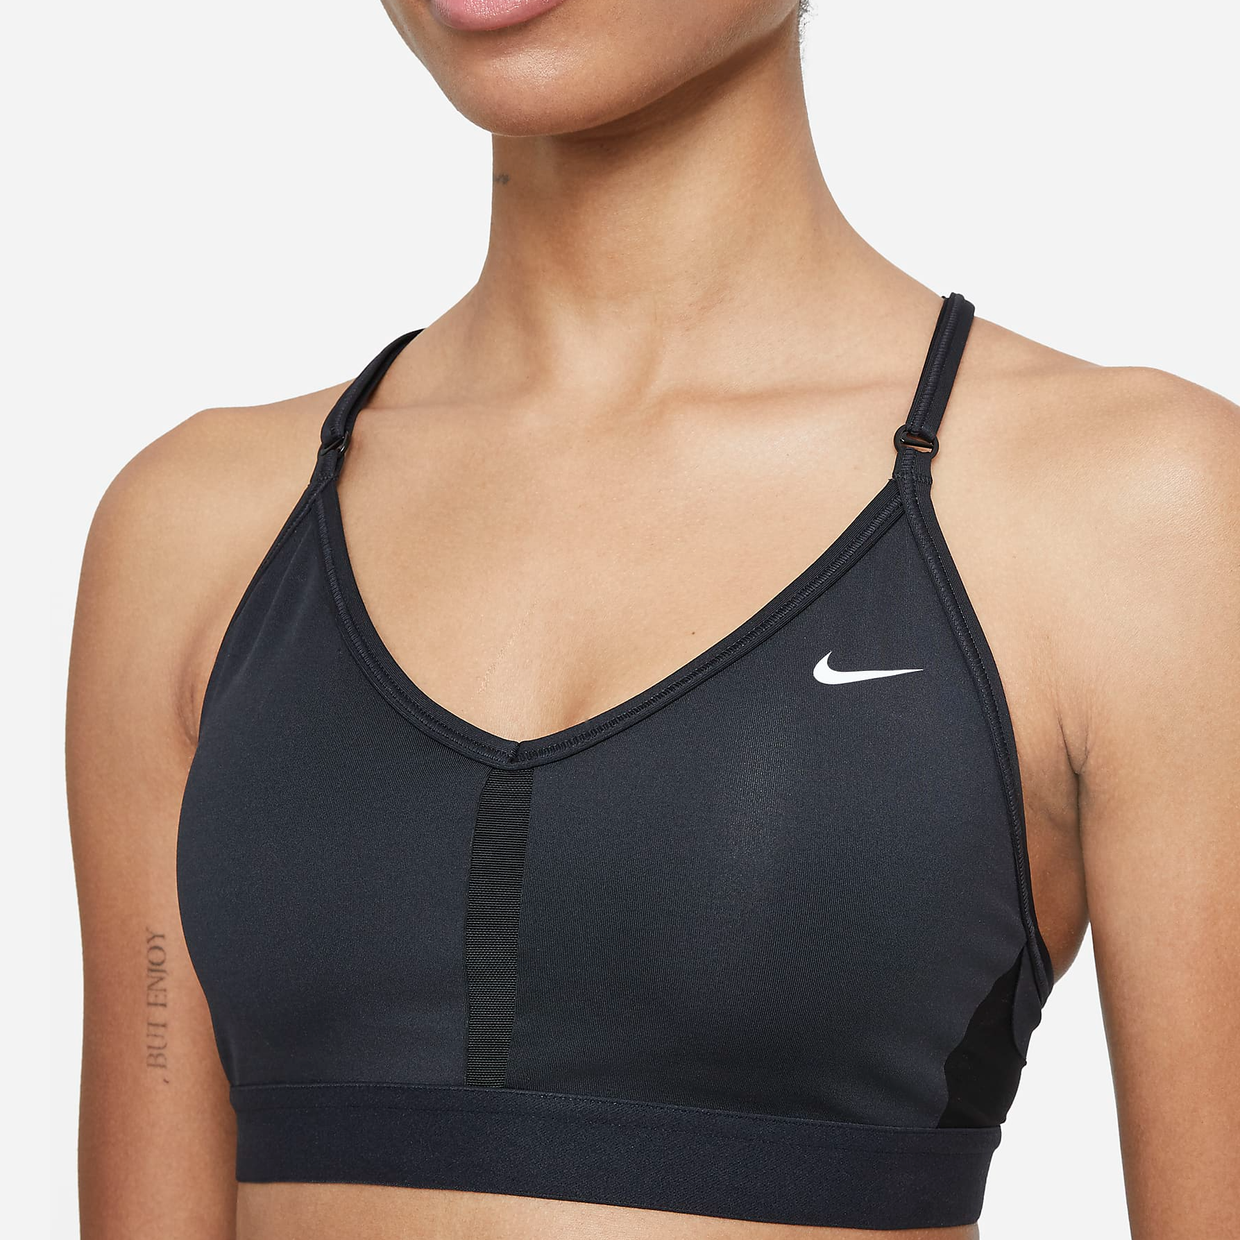 Black Nike sports bra with adjustable straps and white logo on the left side.